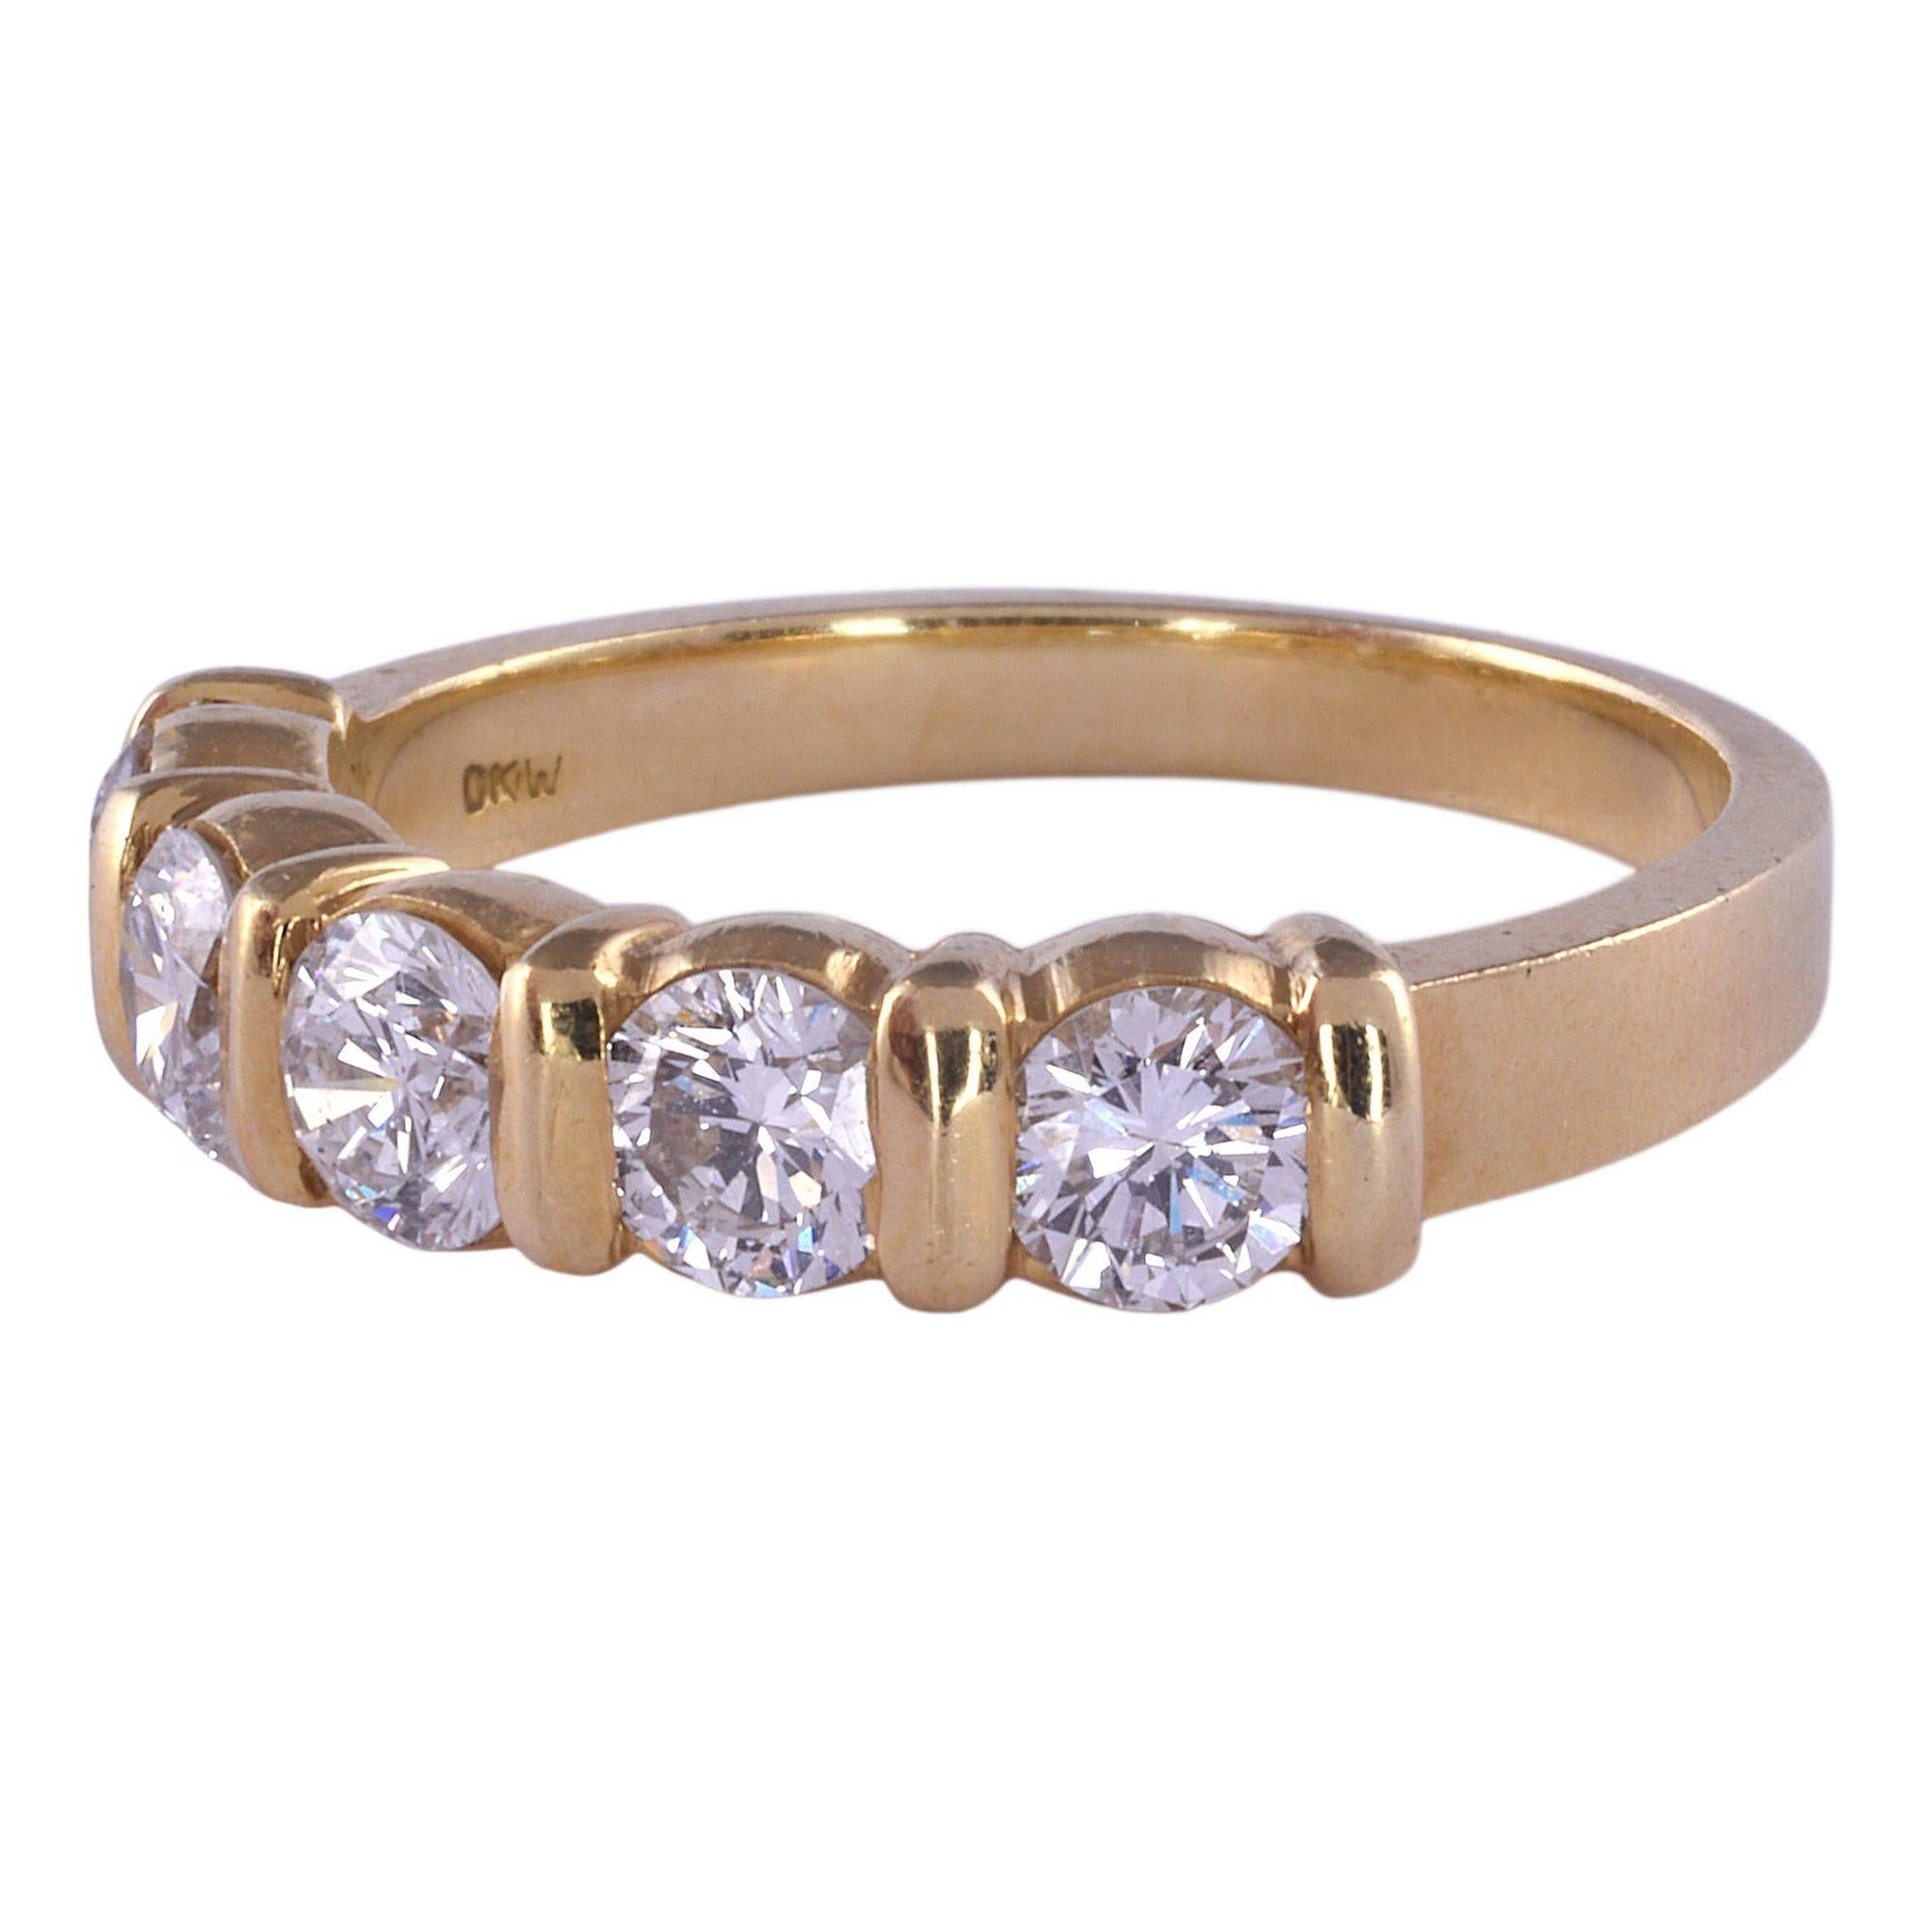 Estate five diamond 18K gold band. This band style ring is crafted in 18 karat yellow gold and features five diamonds at .90 carat total weight. The diamonds have SI1-2 clarity and H-I color. This diamond band is a size 5.75. [KIMH 2930